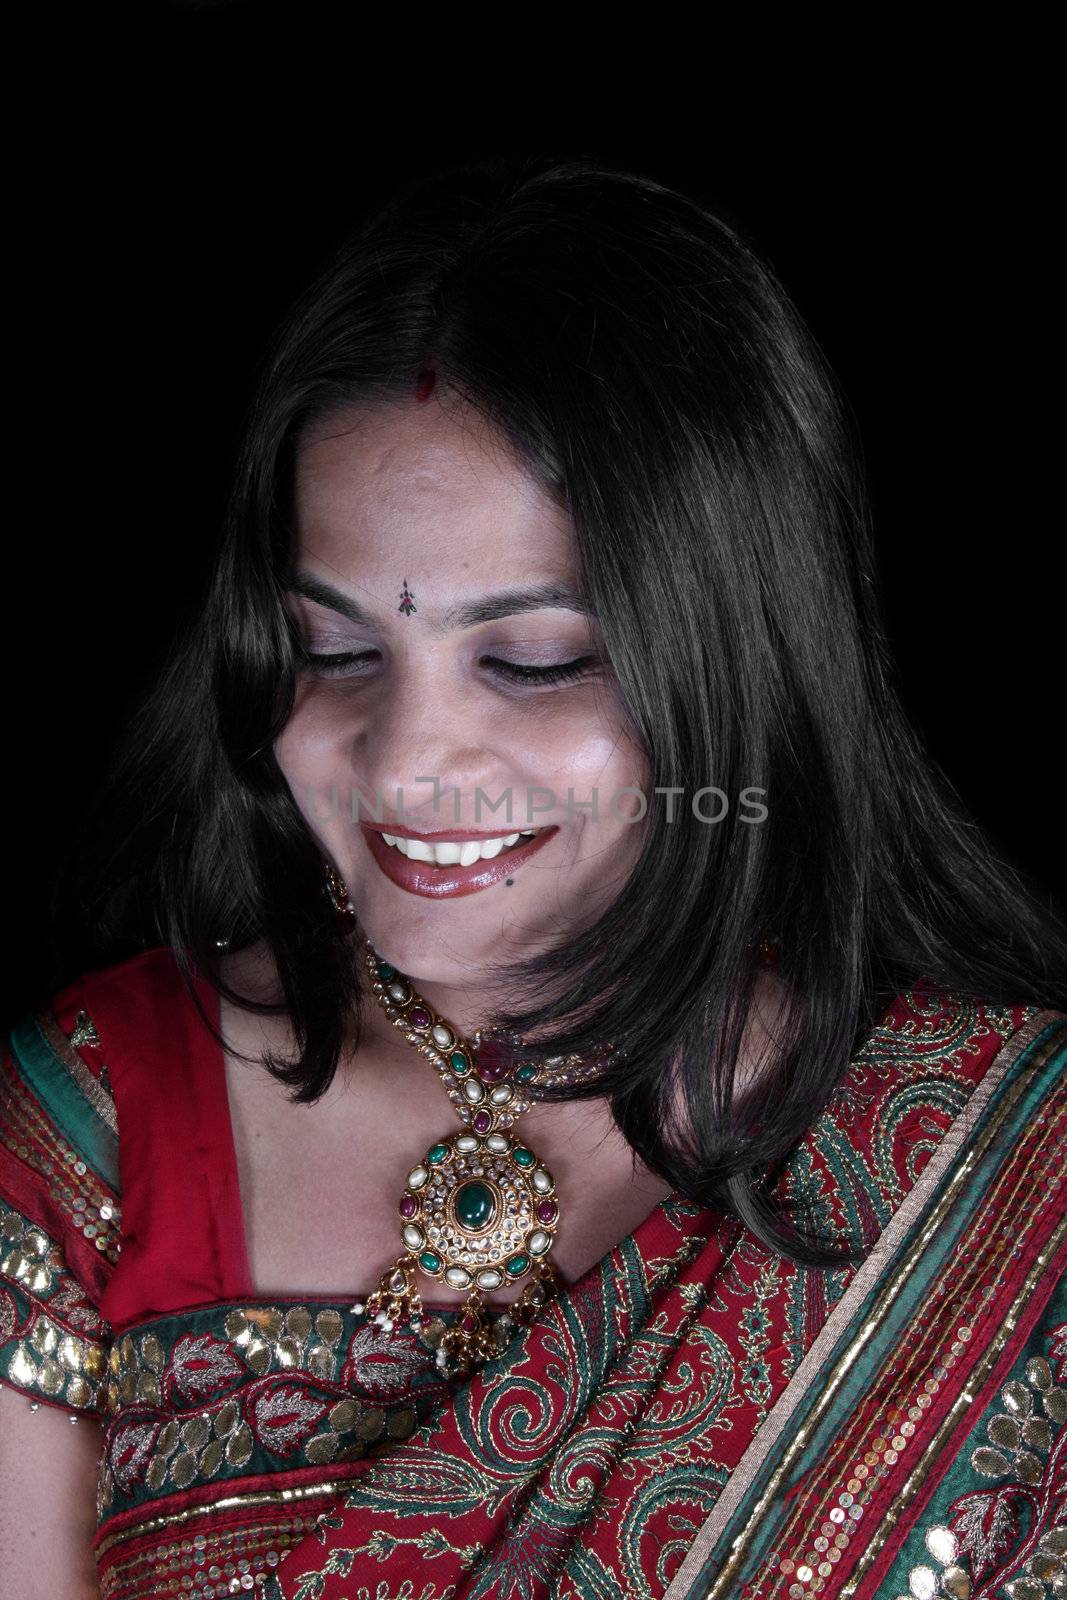 A portrait of a shy embarrassed Indian woman.